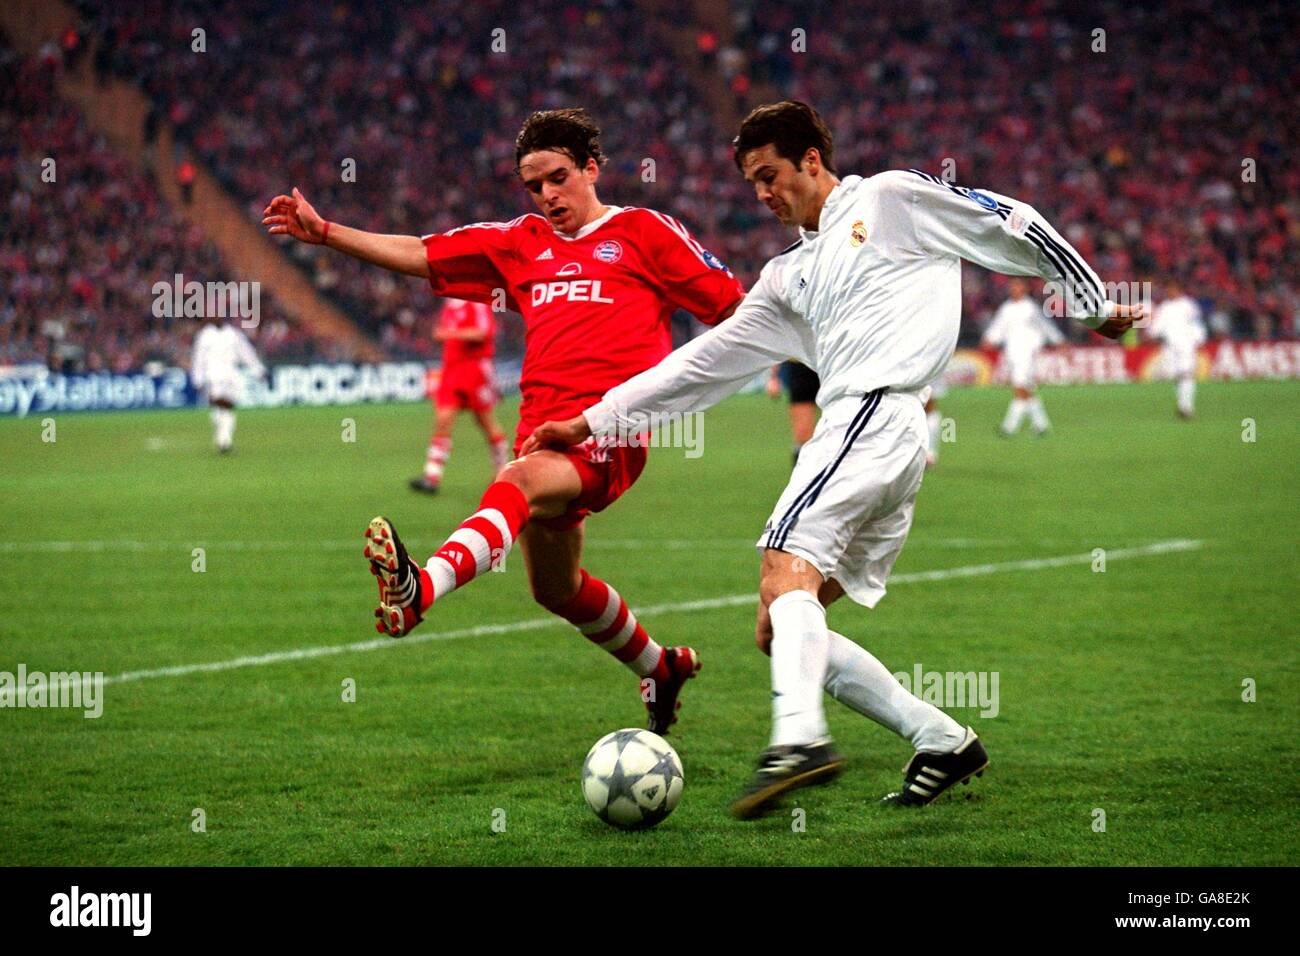 Soccer - UEFA Champions League - Quarter Final - First Leg - Bayern Munich v Real Madrid. Real Madrid's Santiago Solari (r) tries to cross the ball under pressure from Bayern Munich's Owen Hargreaves (l) Stock Photo